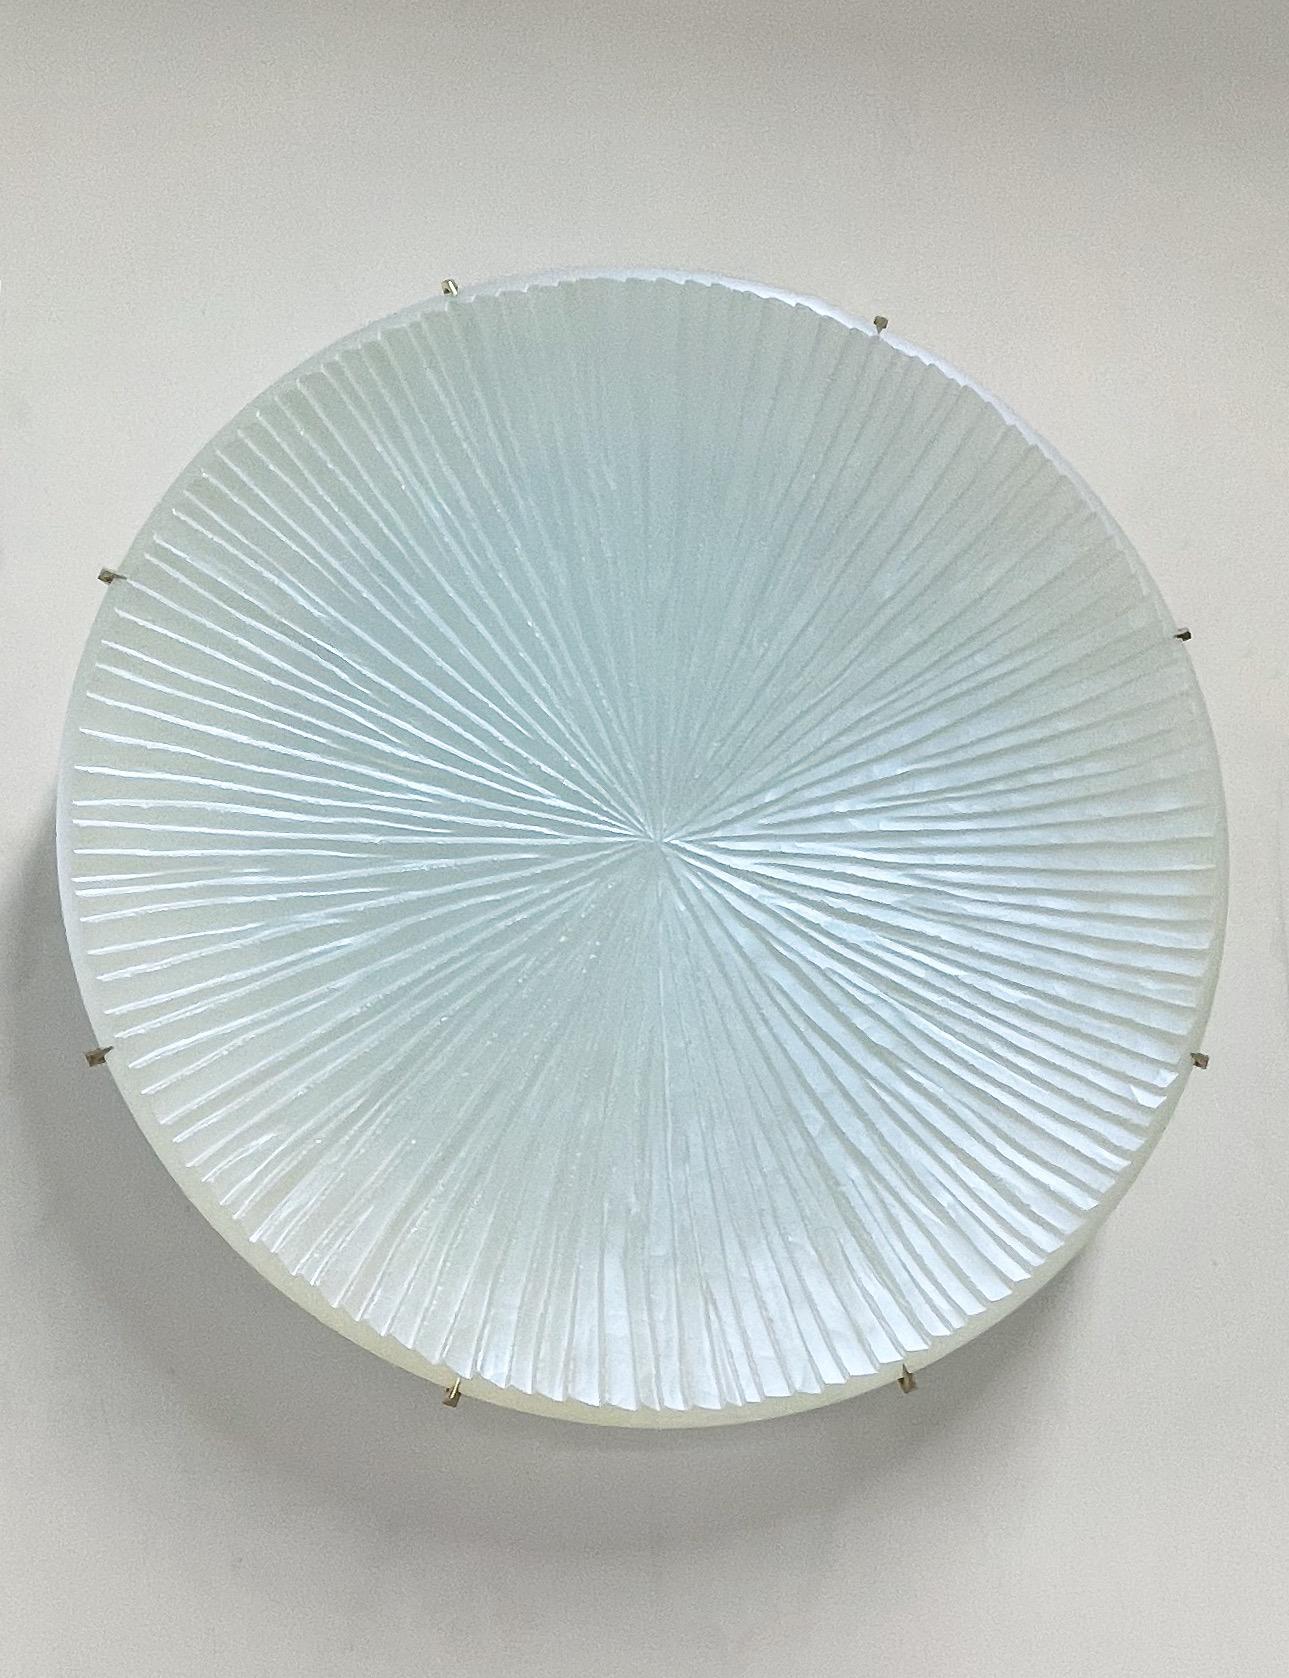 Modern Contemporary Pearly White Concave Wall Plate by Ghiró Studio For Sale